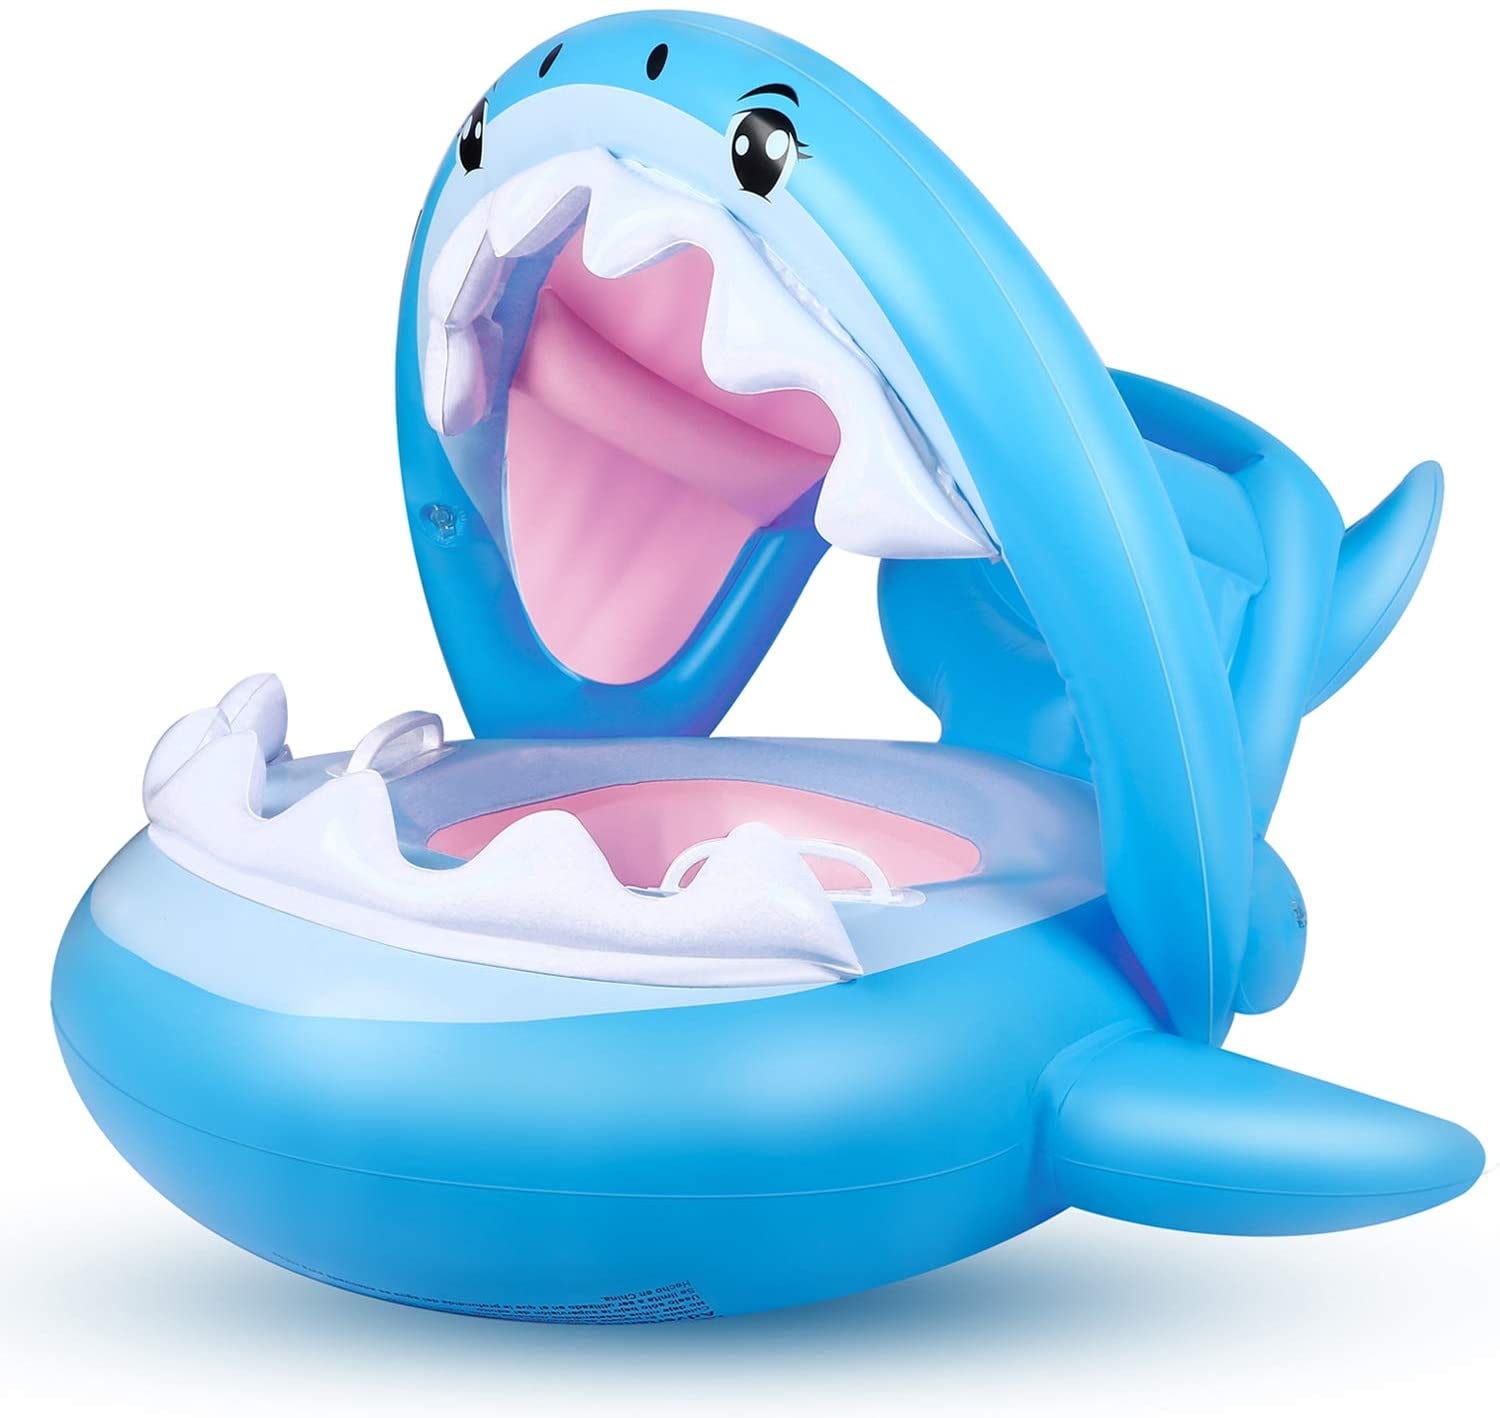 Shark Shape Swimming Ring Kids Baby Children Inflatable Pool Seat Floating Boat 